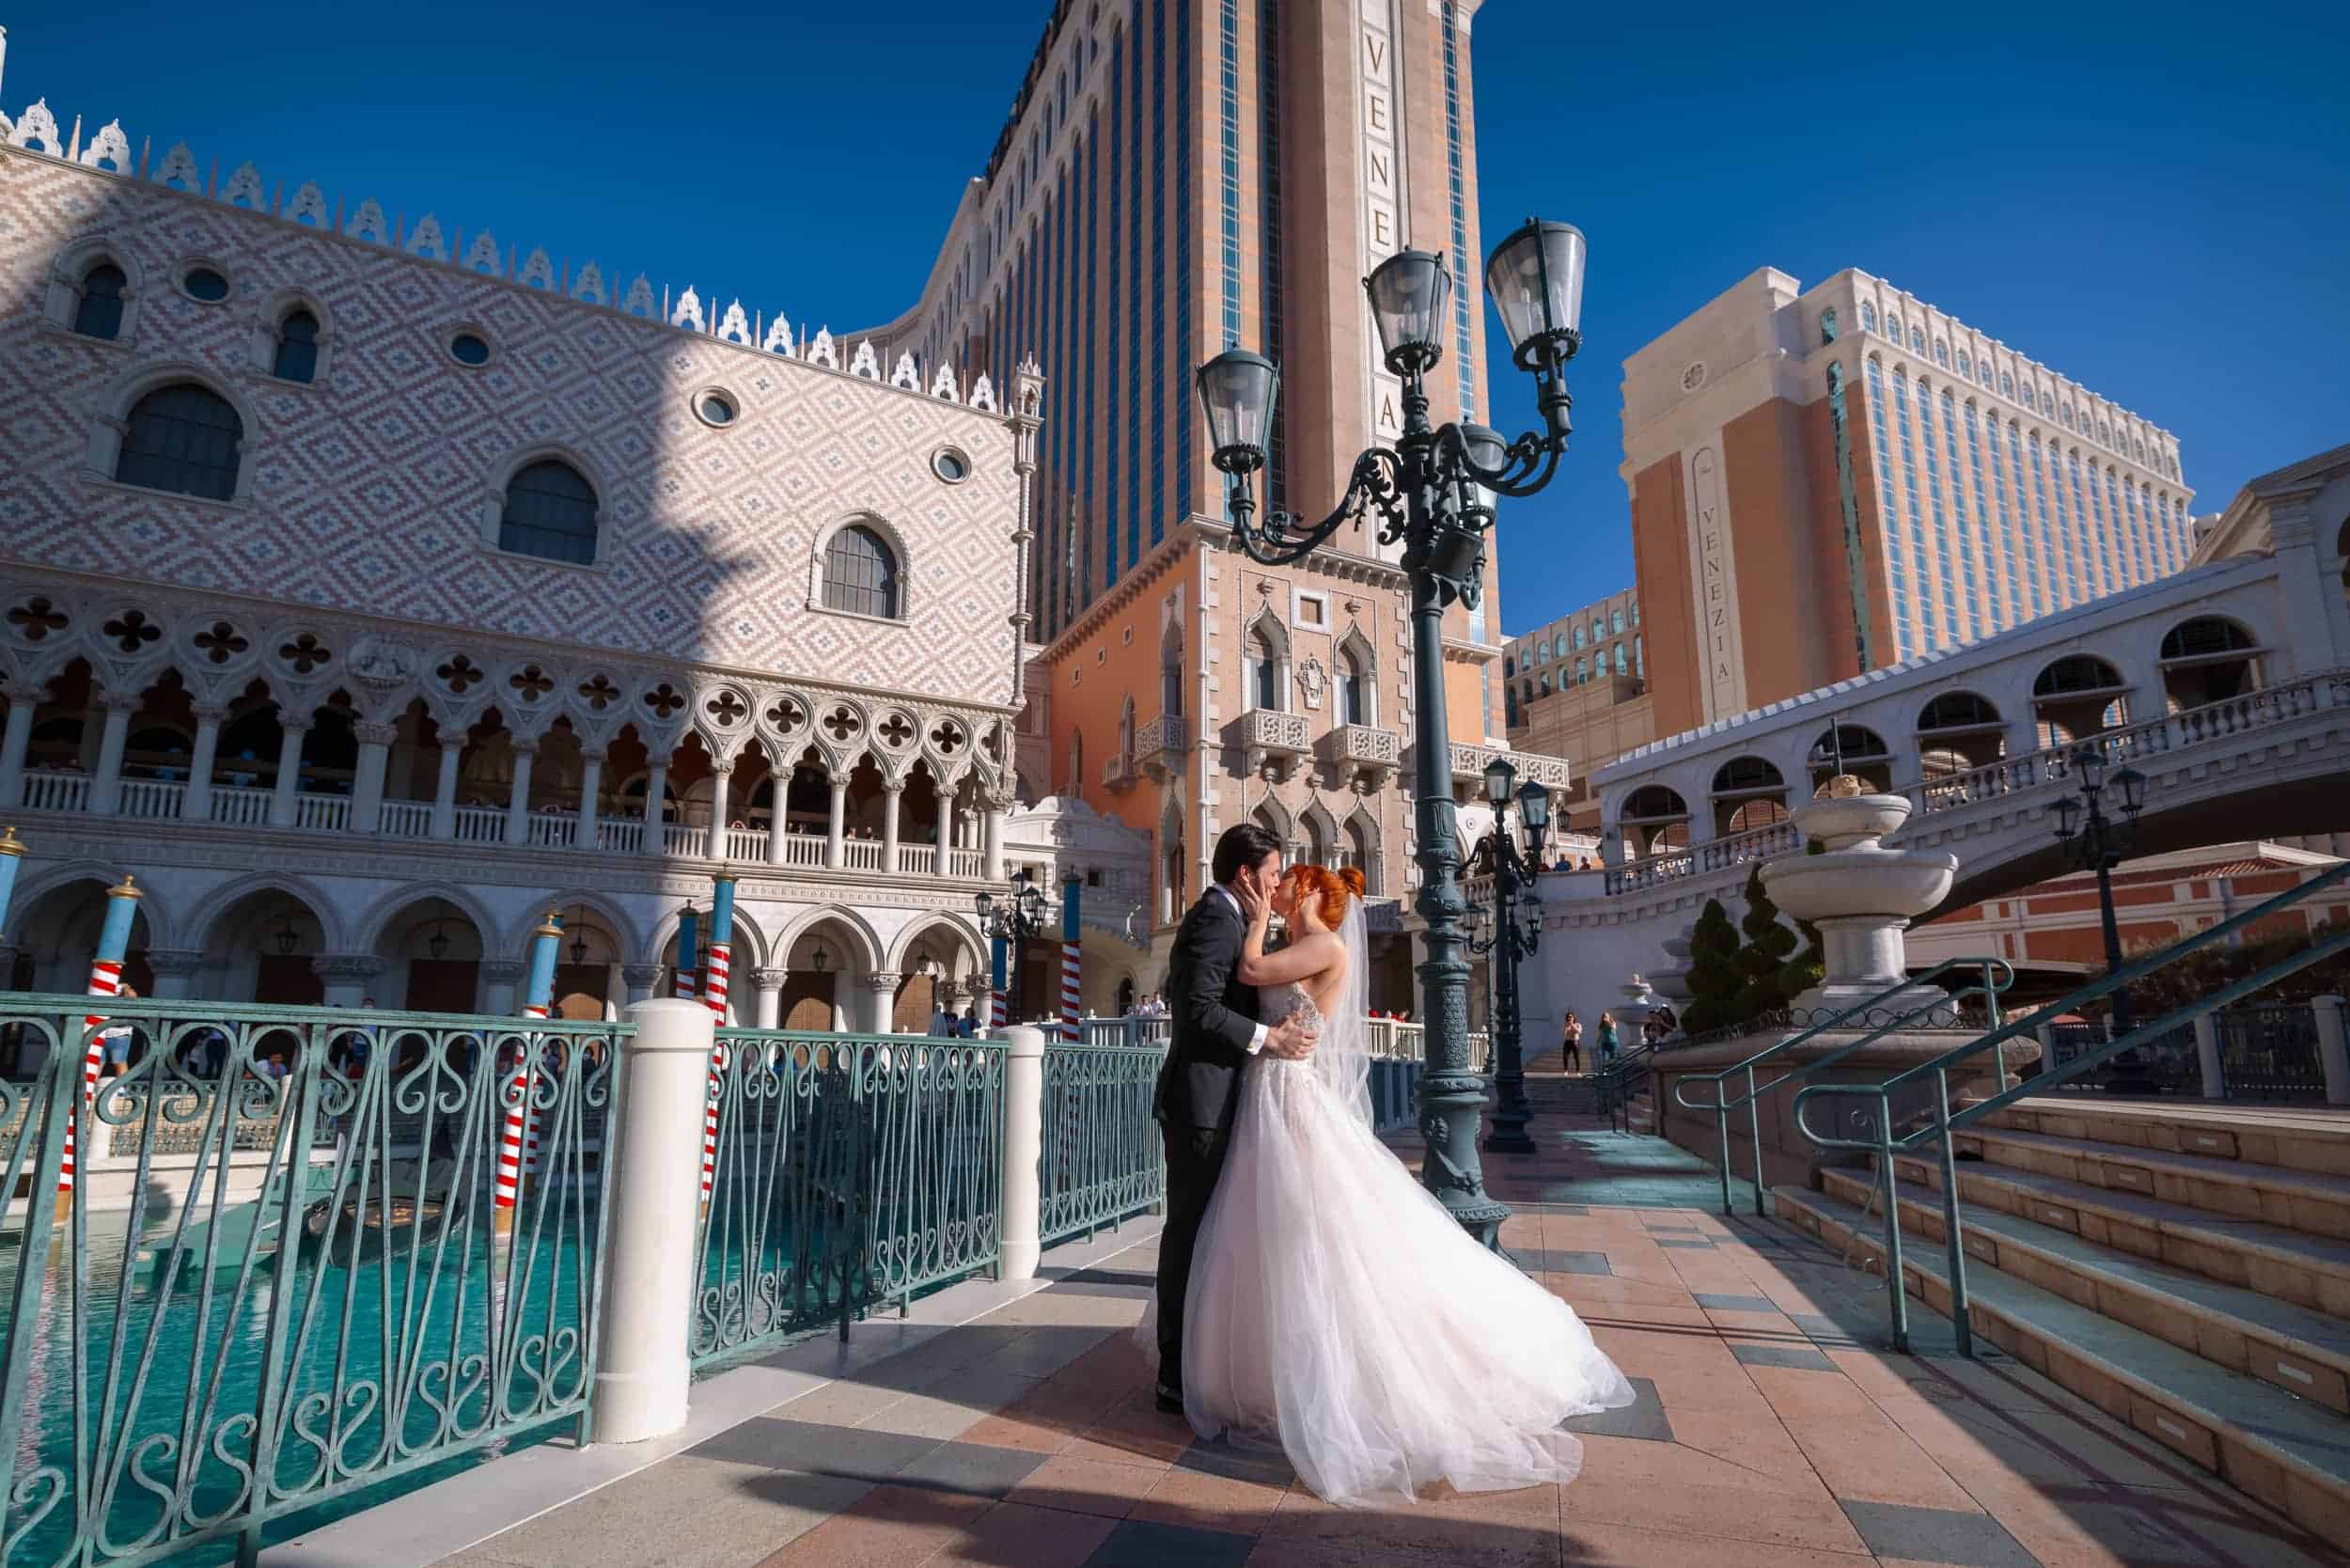 Las Vegas Wedding Photography at Venetian Hotel Casino with Oliver and Ashley photographed by Zoltan Redl Nagy.